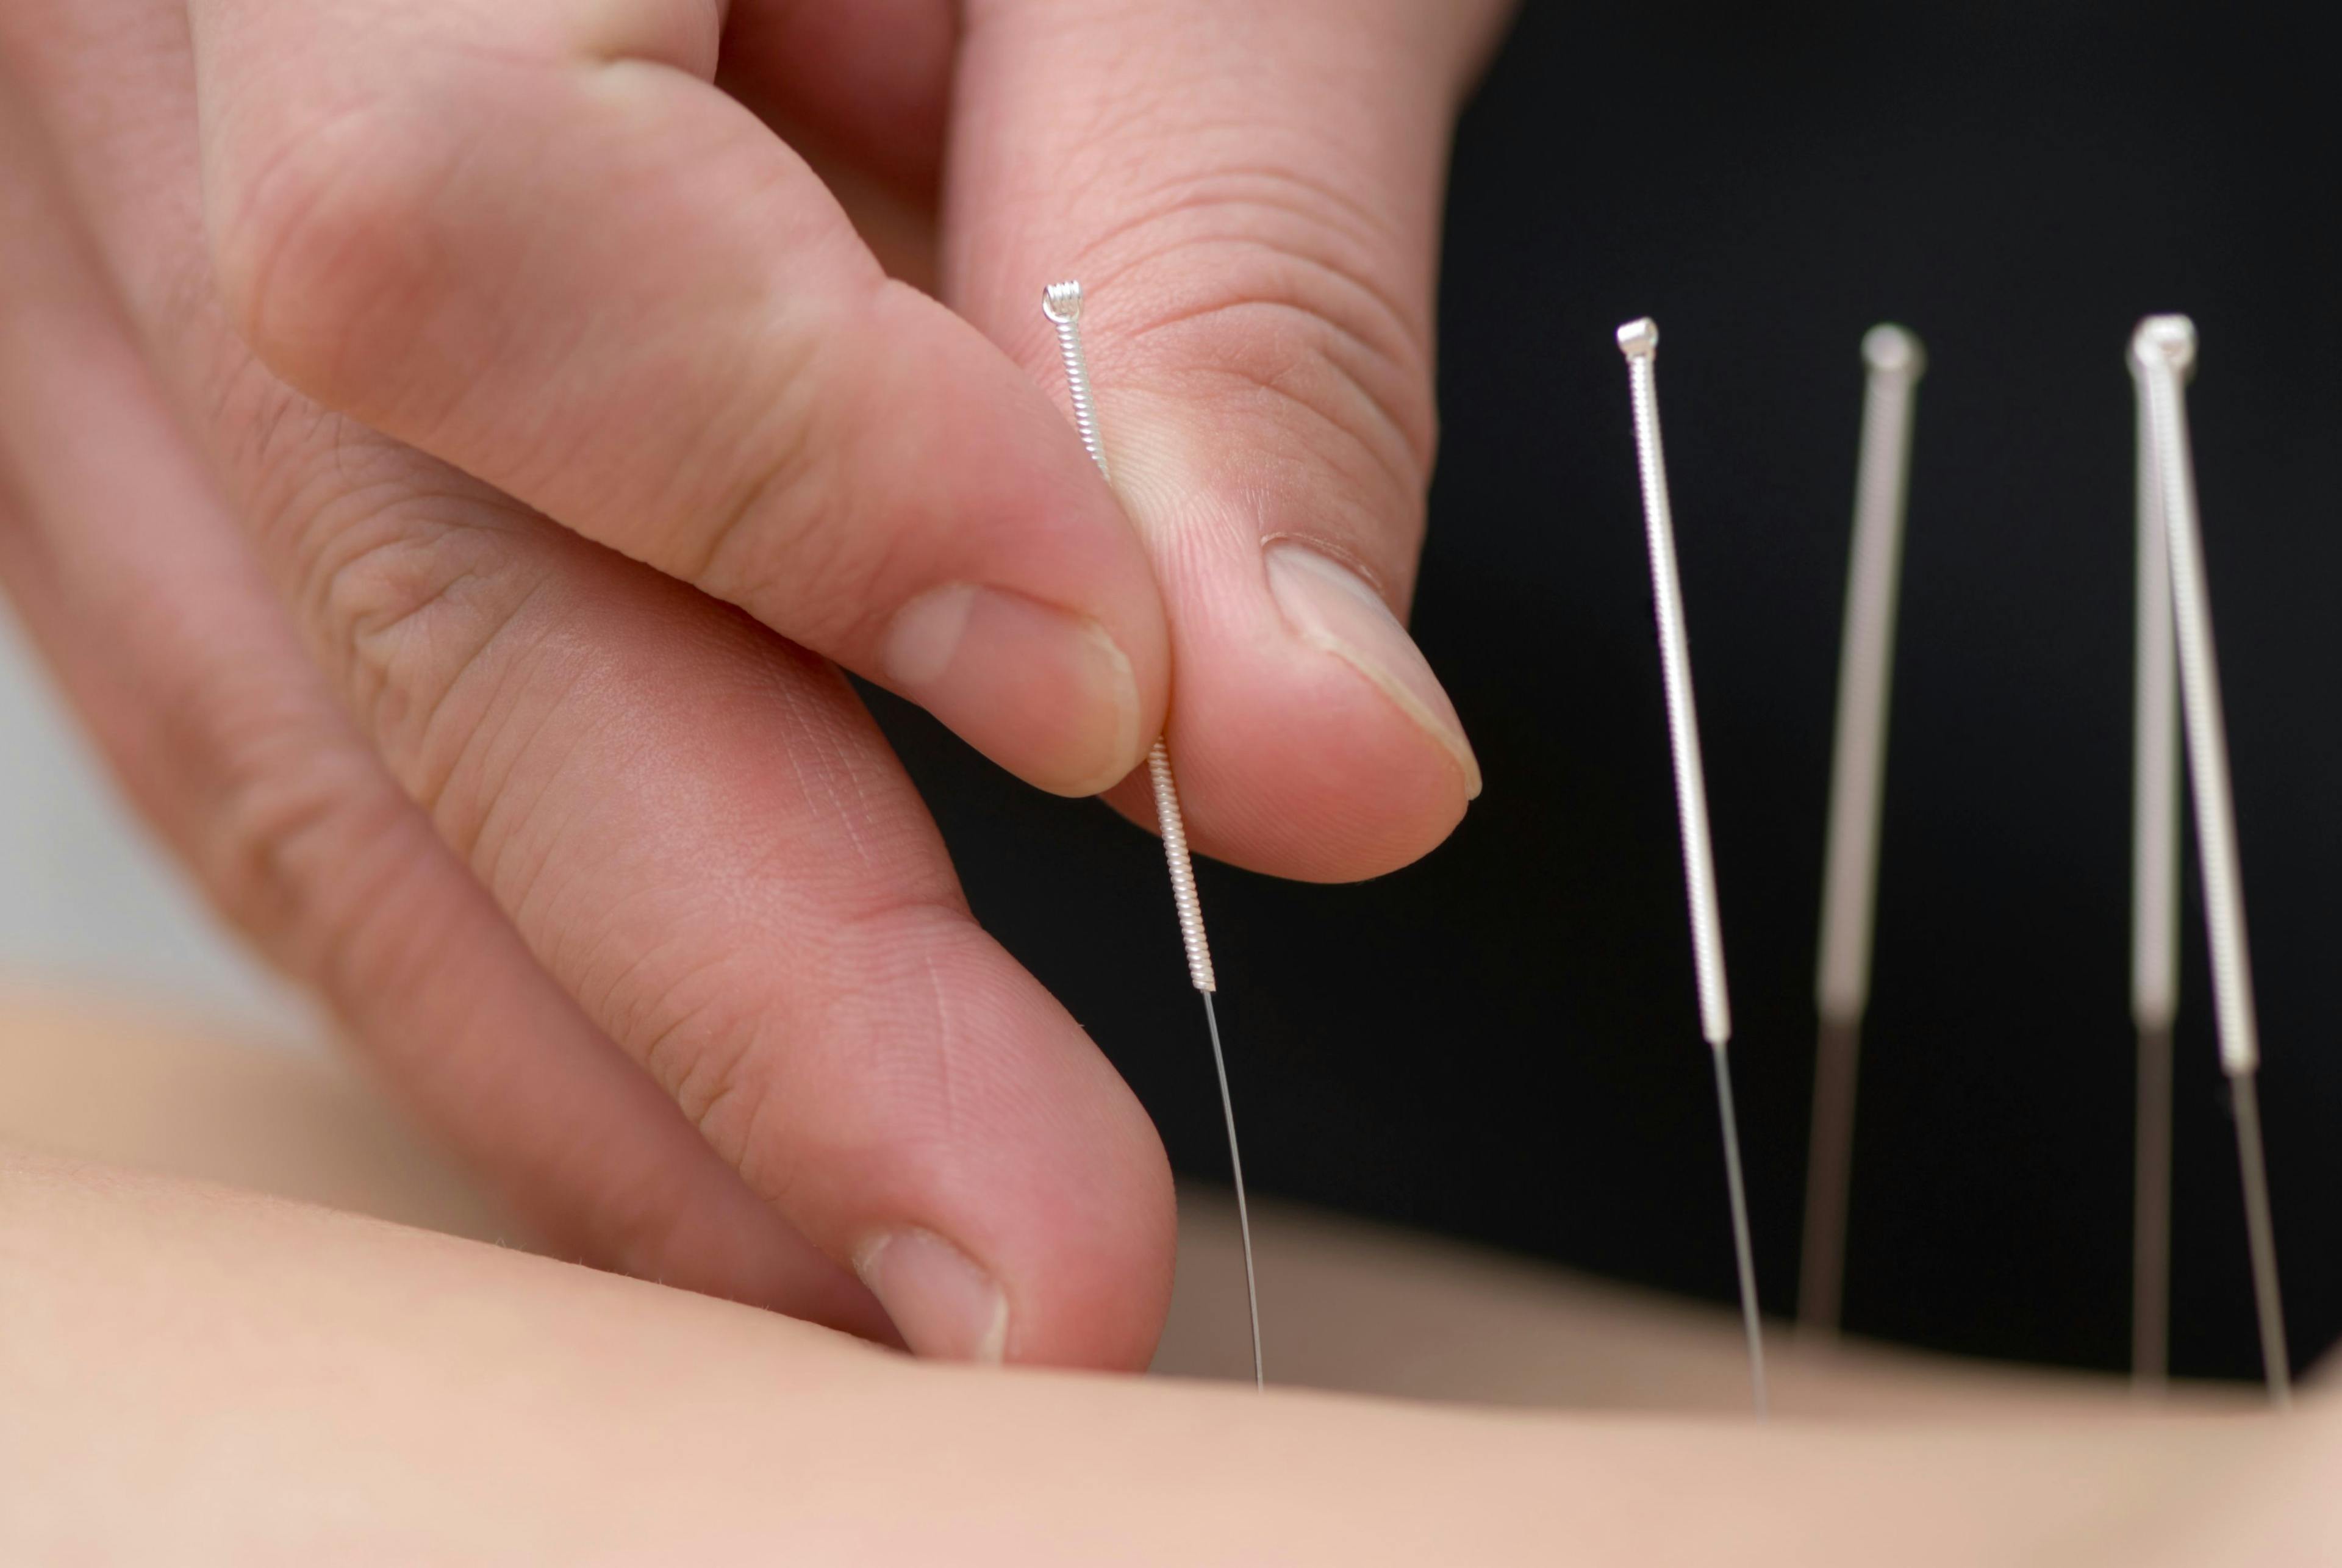 treatment by acupuncture | Image Credit: © Max Tactic - www.stock.adobe.com